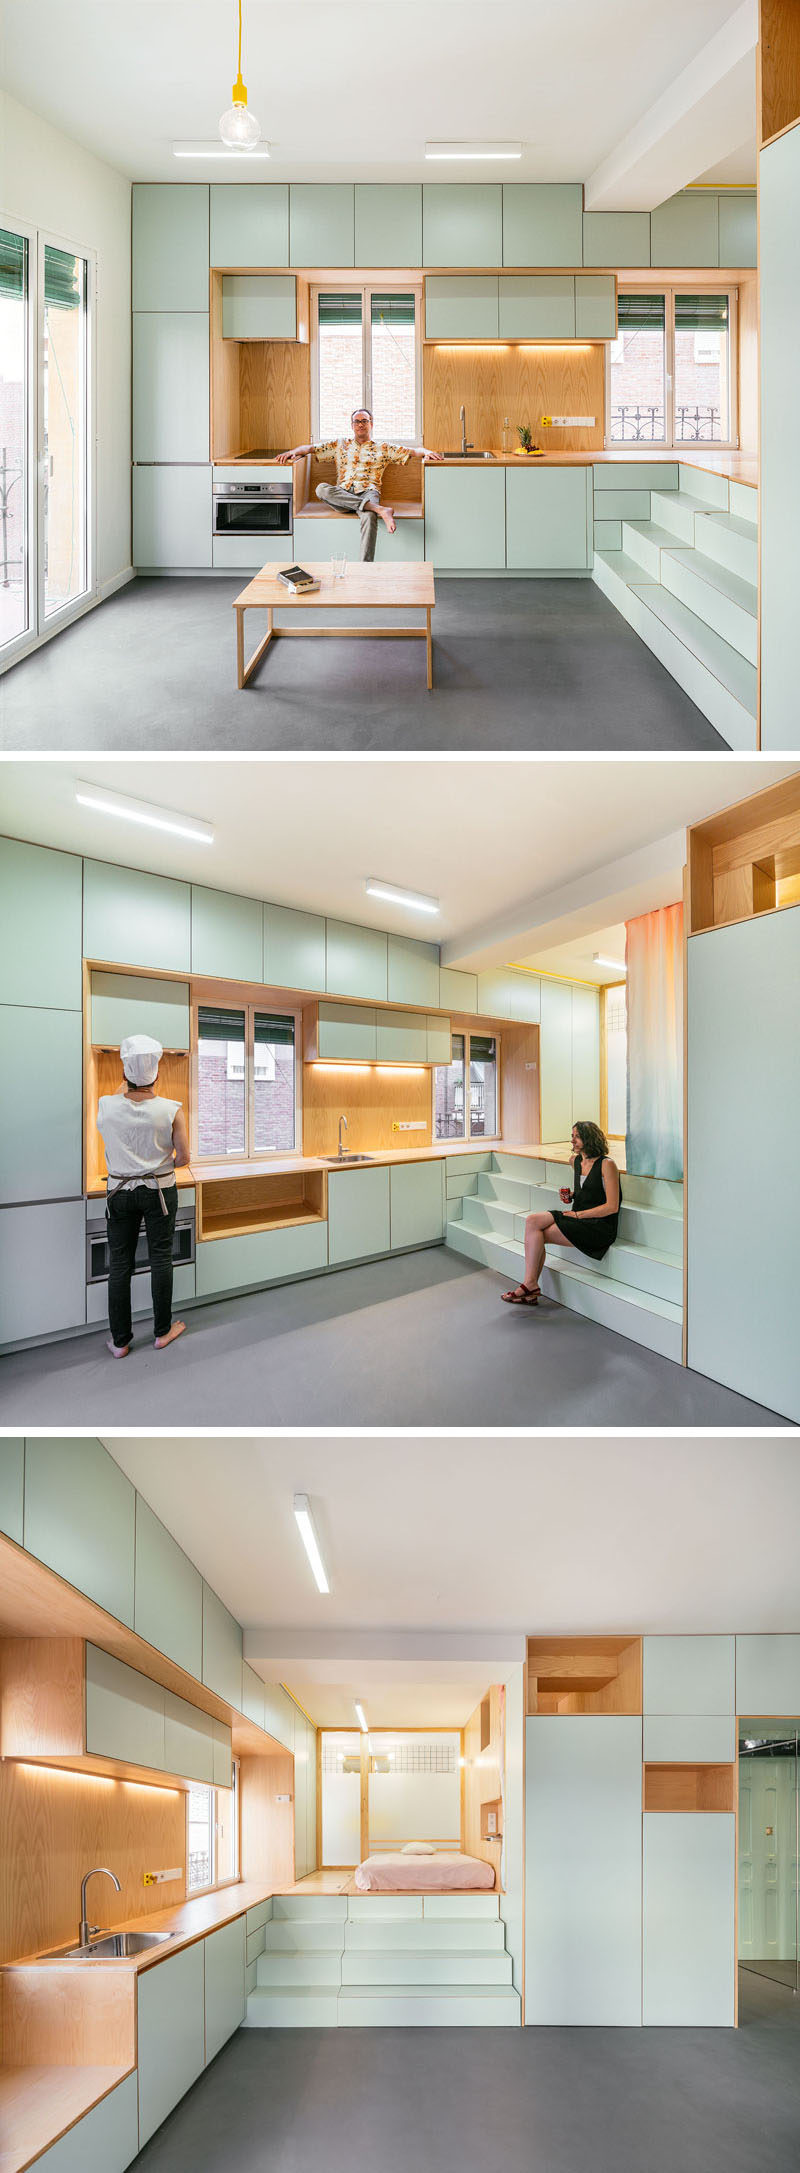 This small and modern apartment has an open area, while the kitchen, with its light blue cabinets and wood features lines the wall.  #SmallApartment #Kitchen